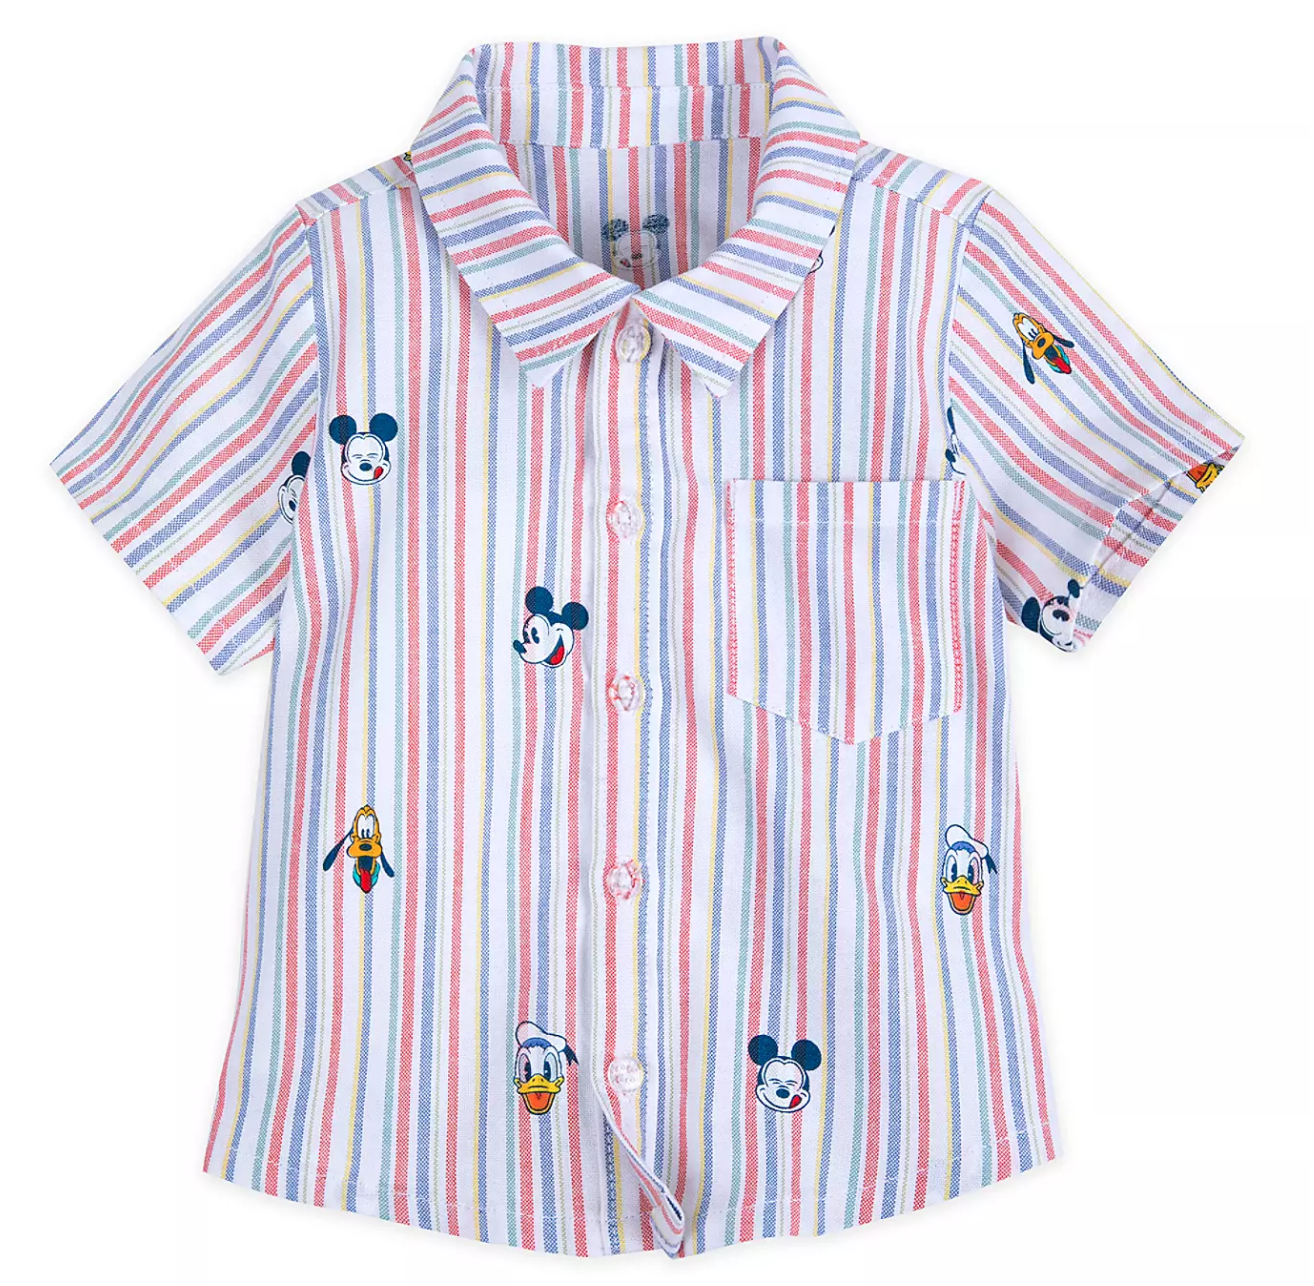 Disney Vacation Plans This Summer? Dress Your Family In These Matching ...